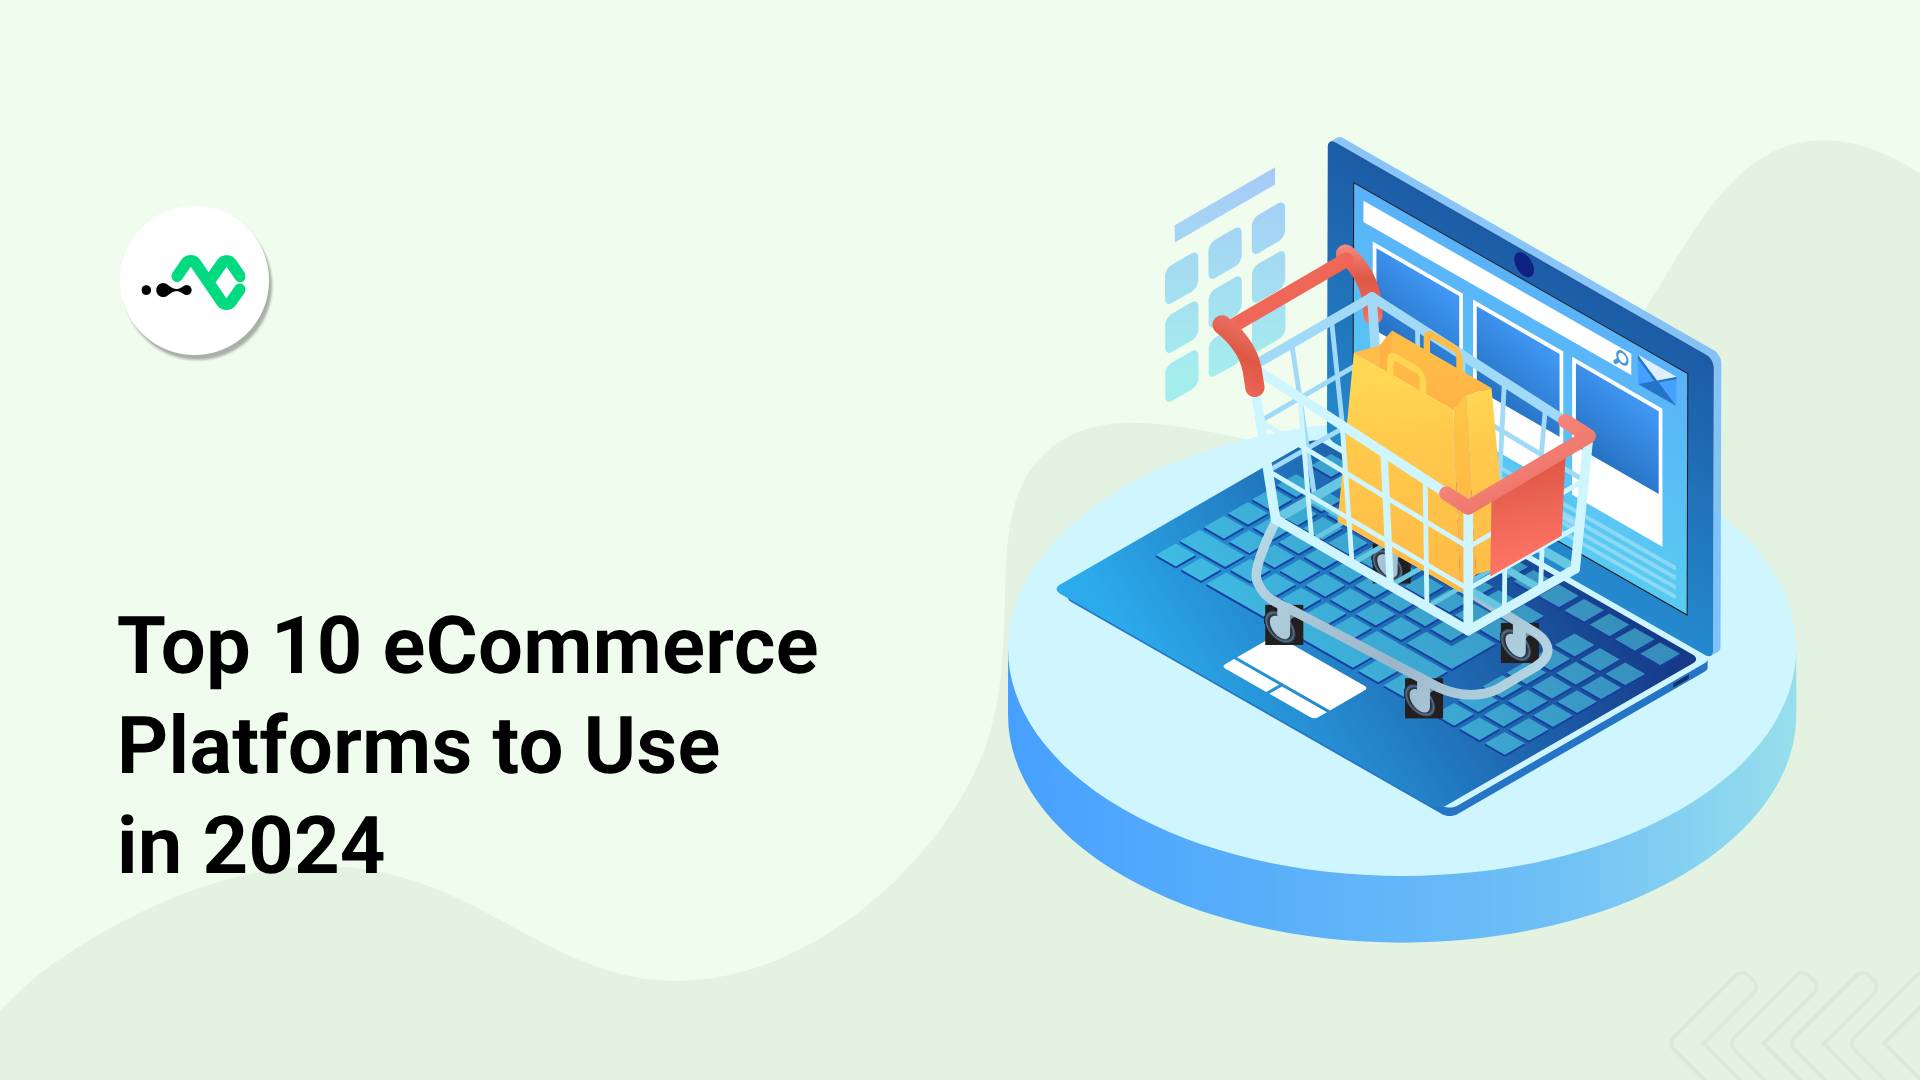 Top 10 eCommerce Platforms to Use in 2023